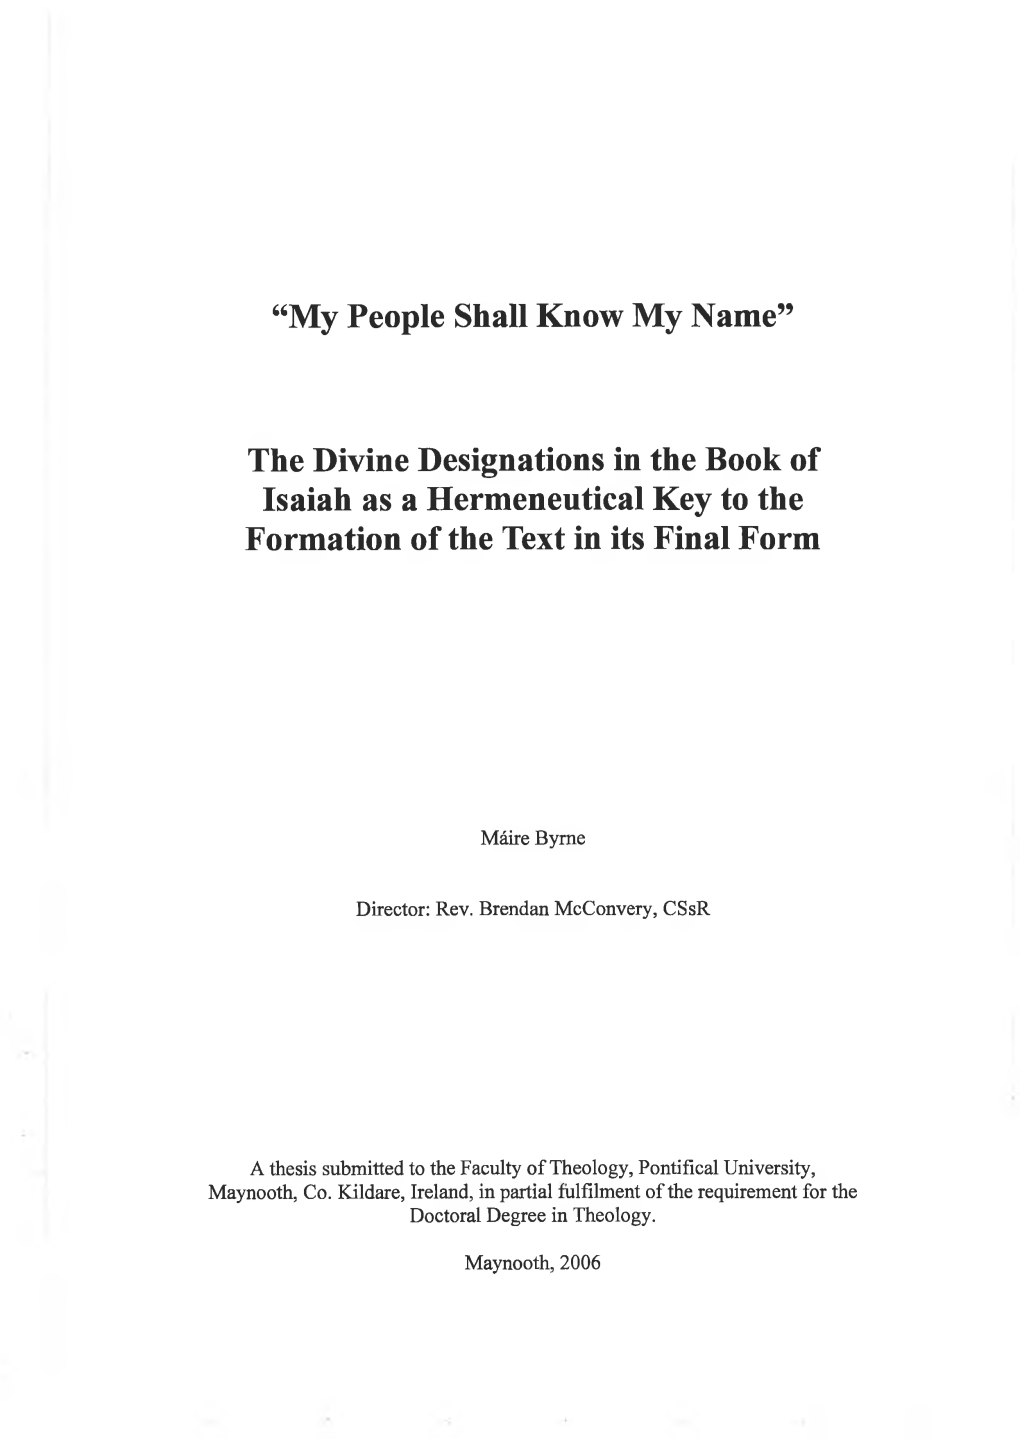 “My People Shall Know My Name” the Divine Designations in The